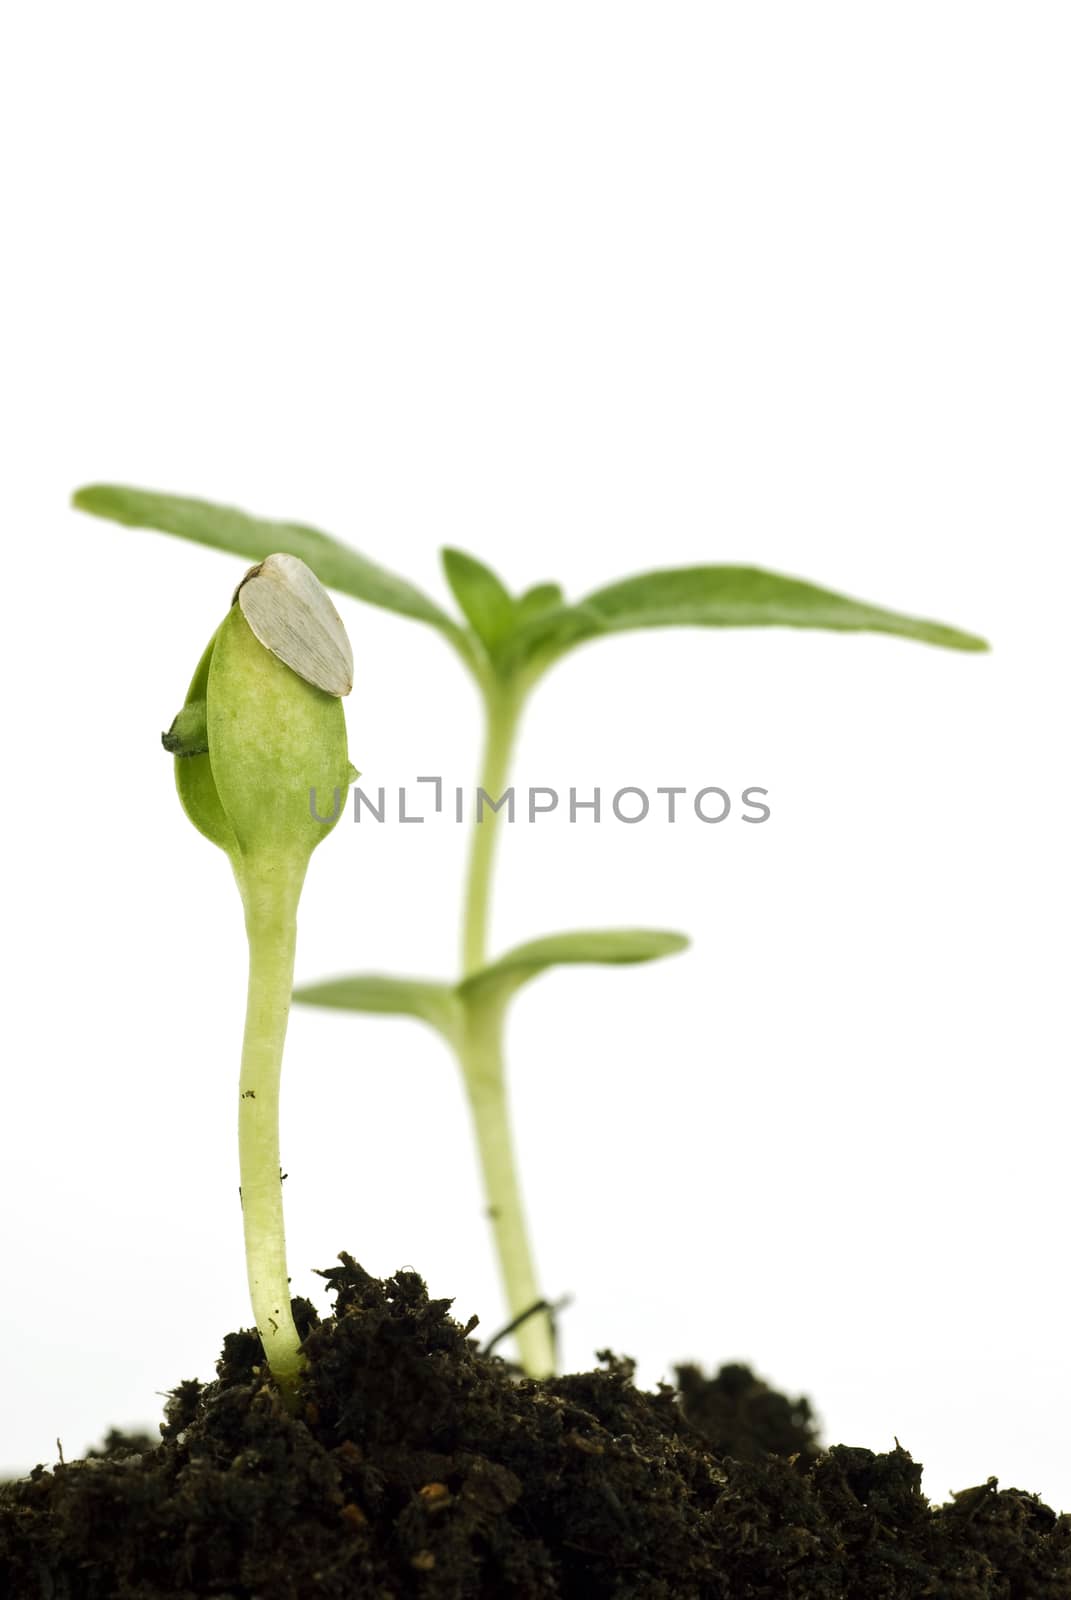 New Life Isolated On White by stockbuster1